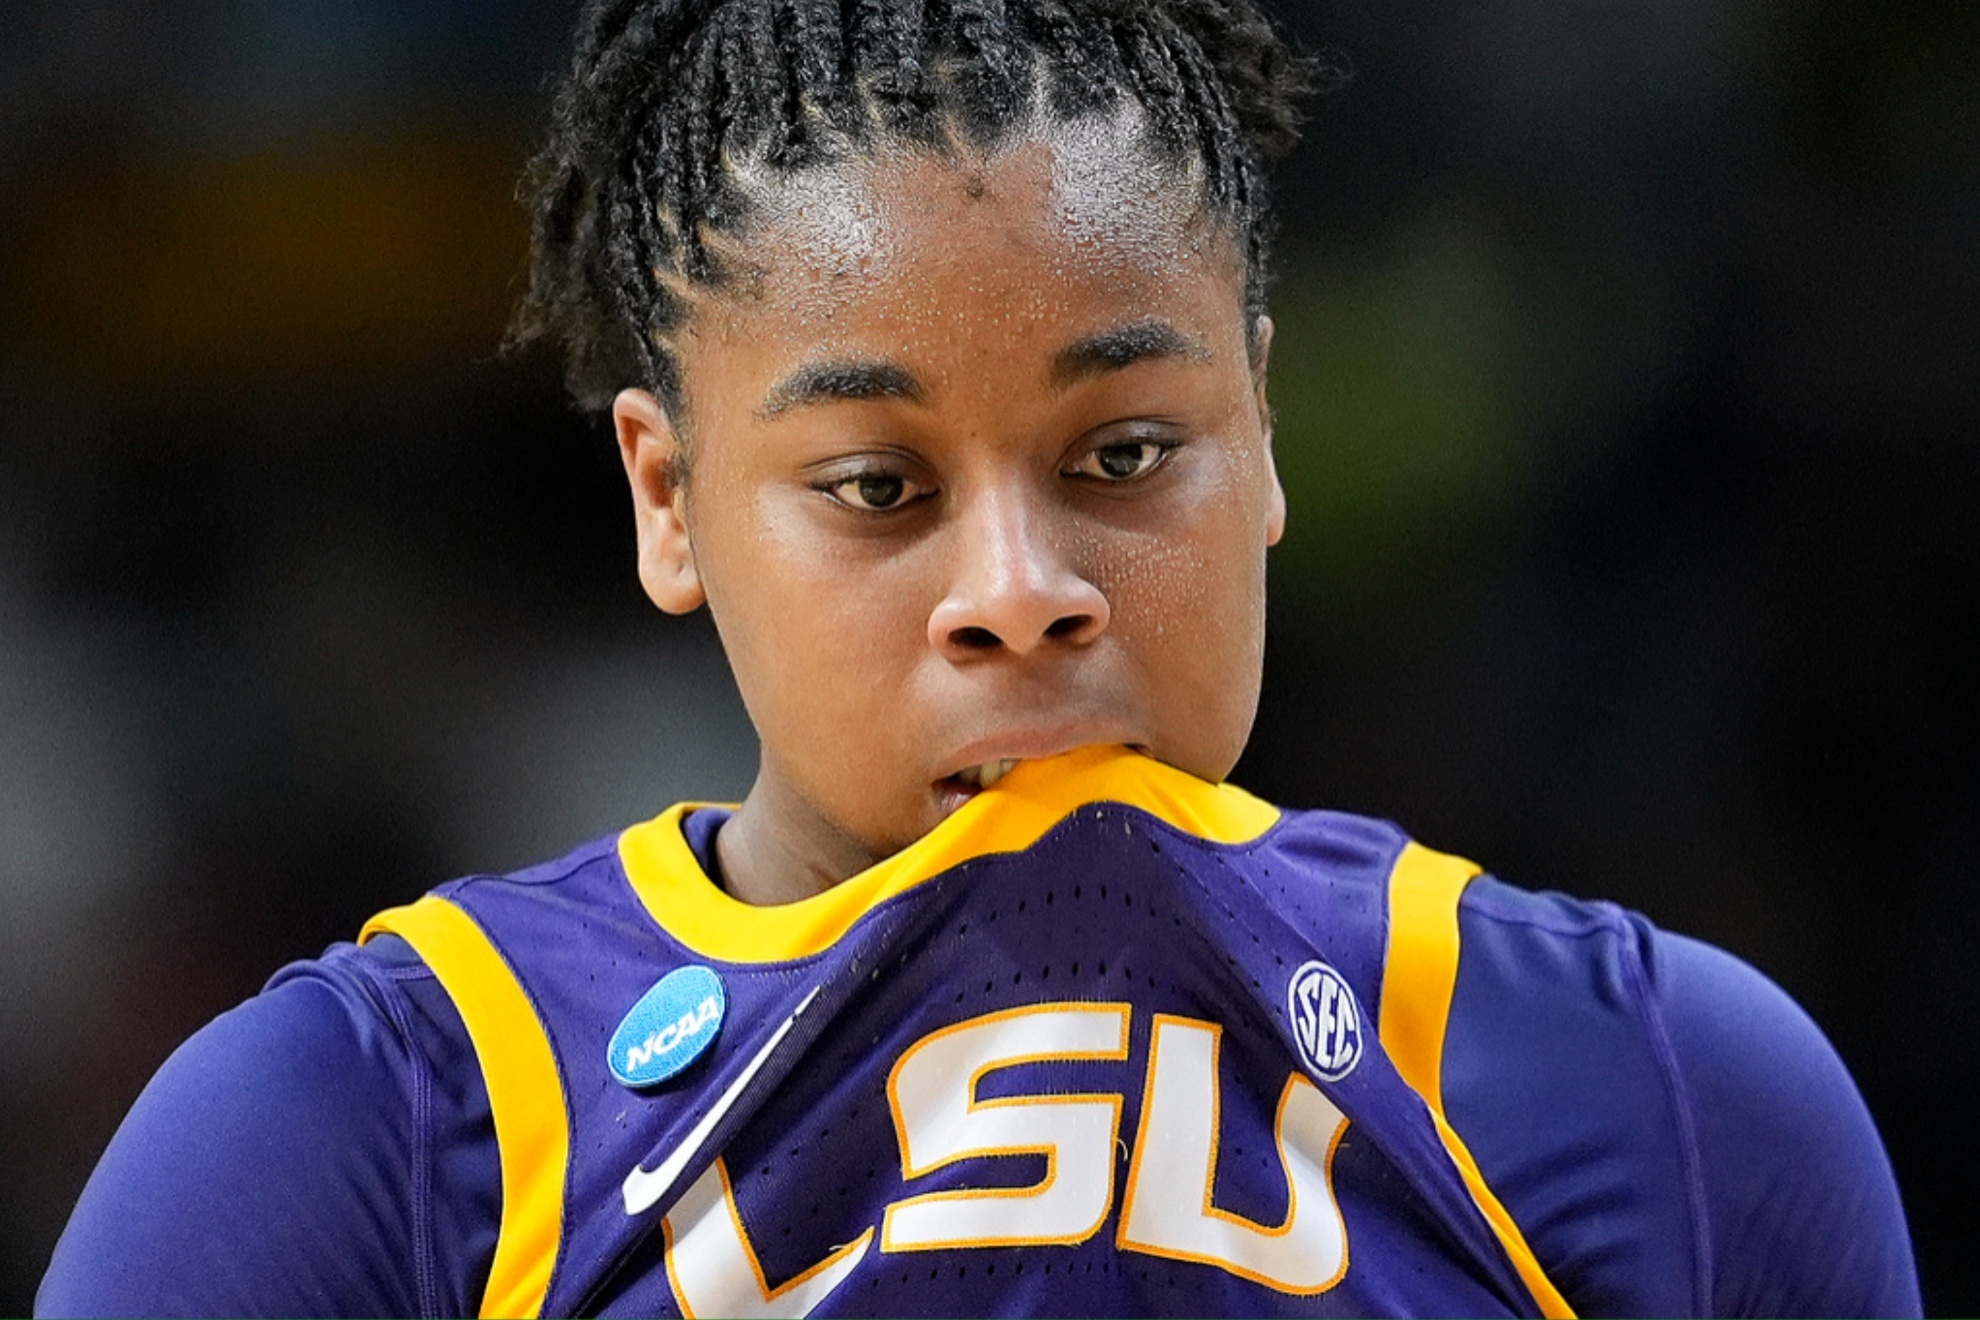 LSUs Mikaylah Williams during the Elite 8 game against Iowa on Monday night